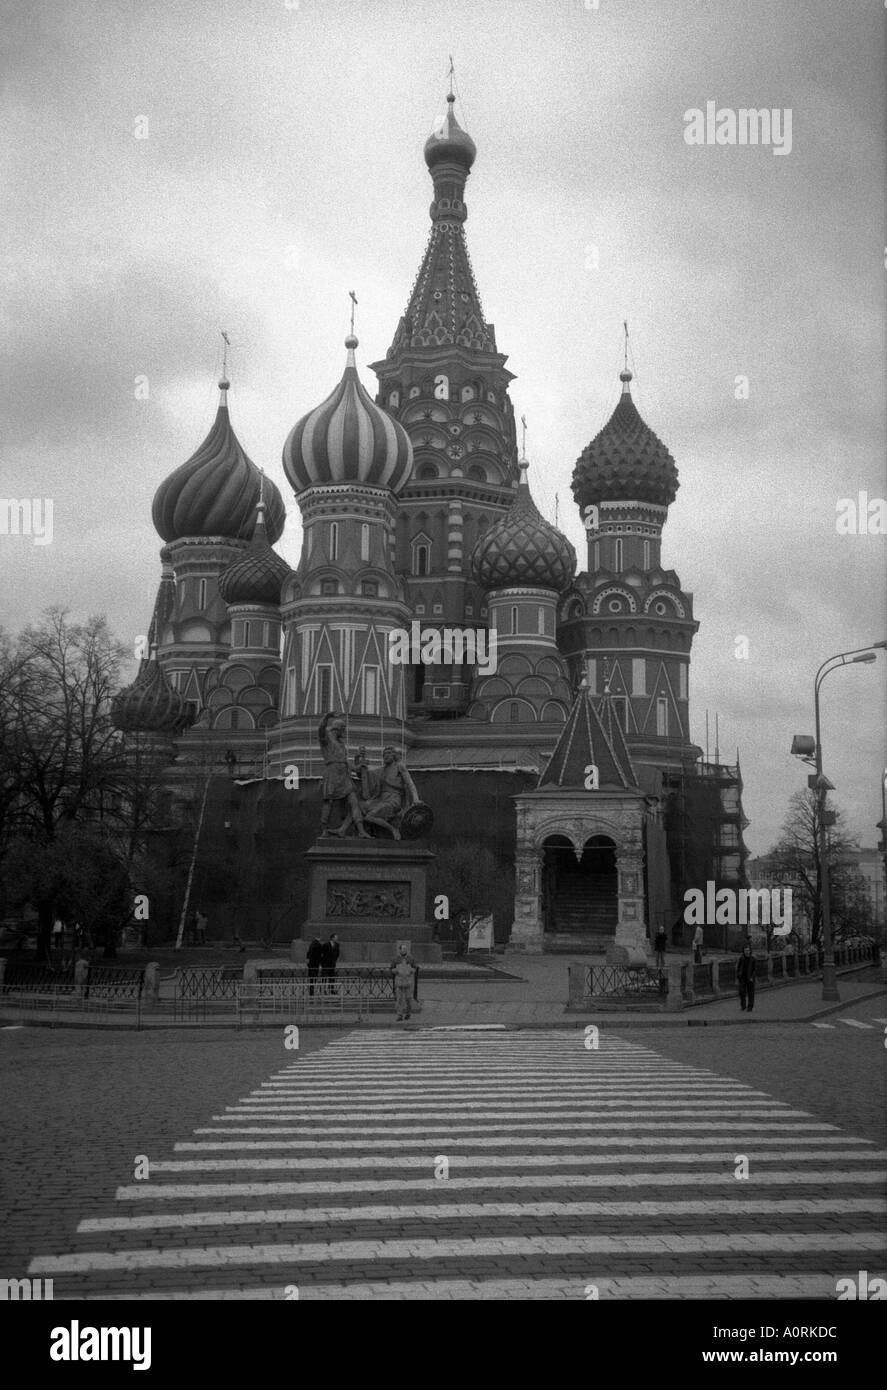 Pozharsky & Minin monument Cathedral of Saint Basil the Blessed Red Square Moscow Russia Russian Federation Eurasia Stock Photo